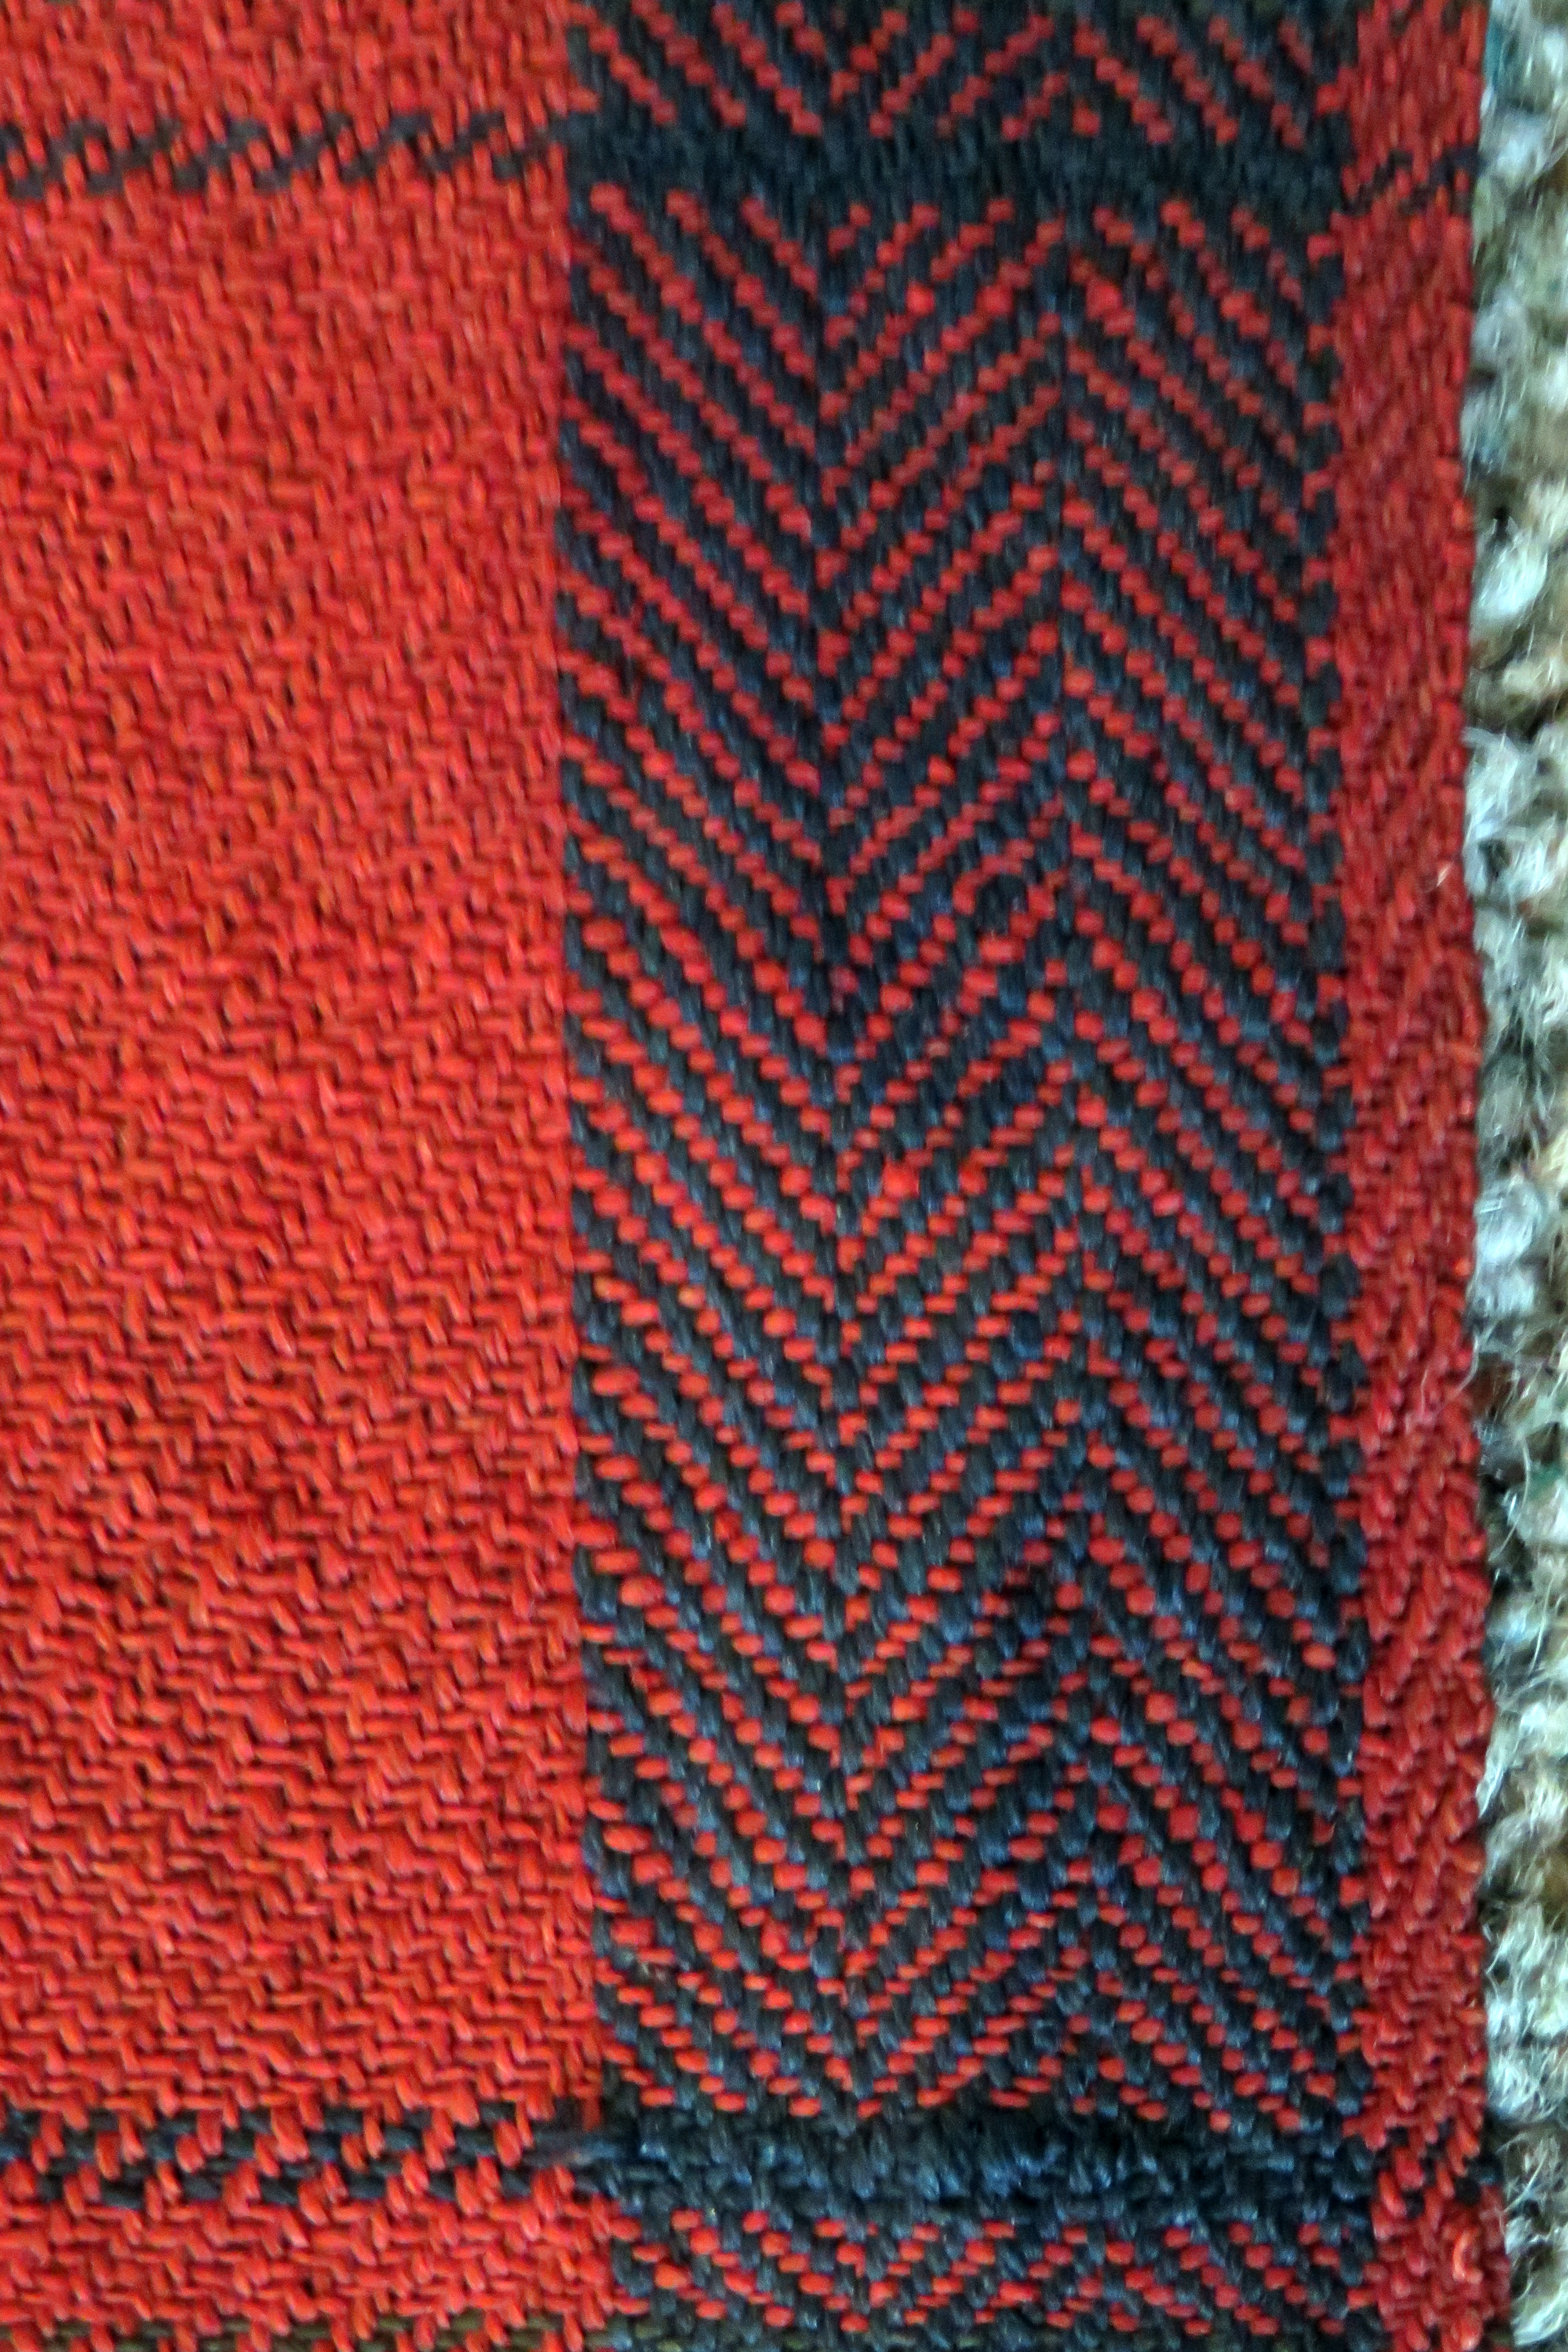 Fig. 7 - Herringbone selvedge from a mid-Eighteenth Century plaid in the collection of the Highland Folk Museum (image copyright: Peter MacDonald, scottishtartans.co.uk)